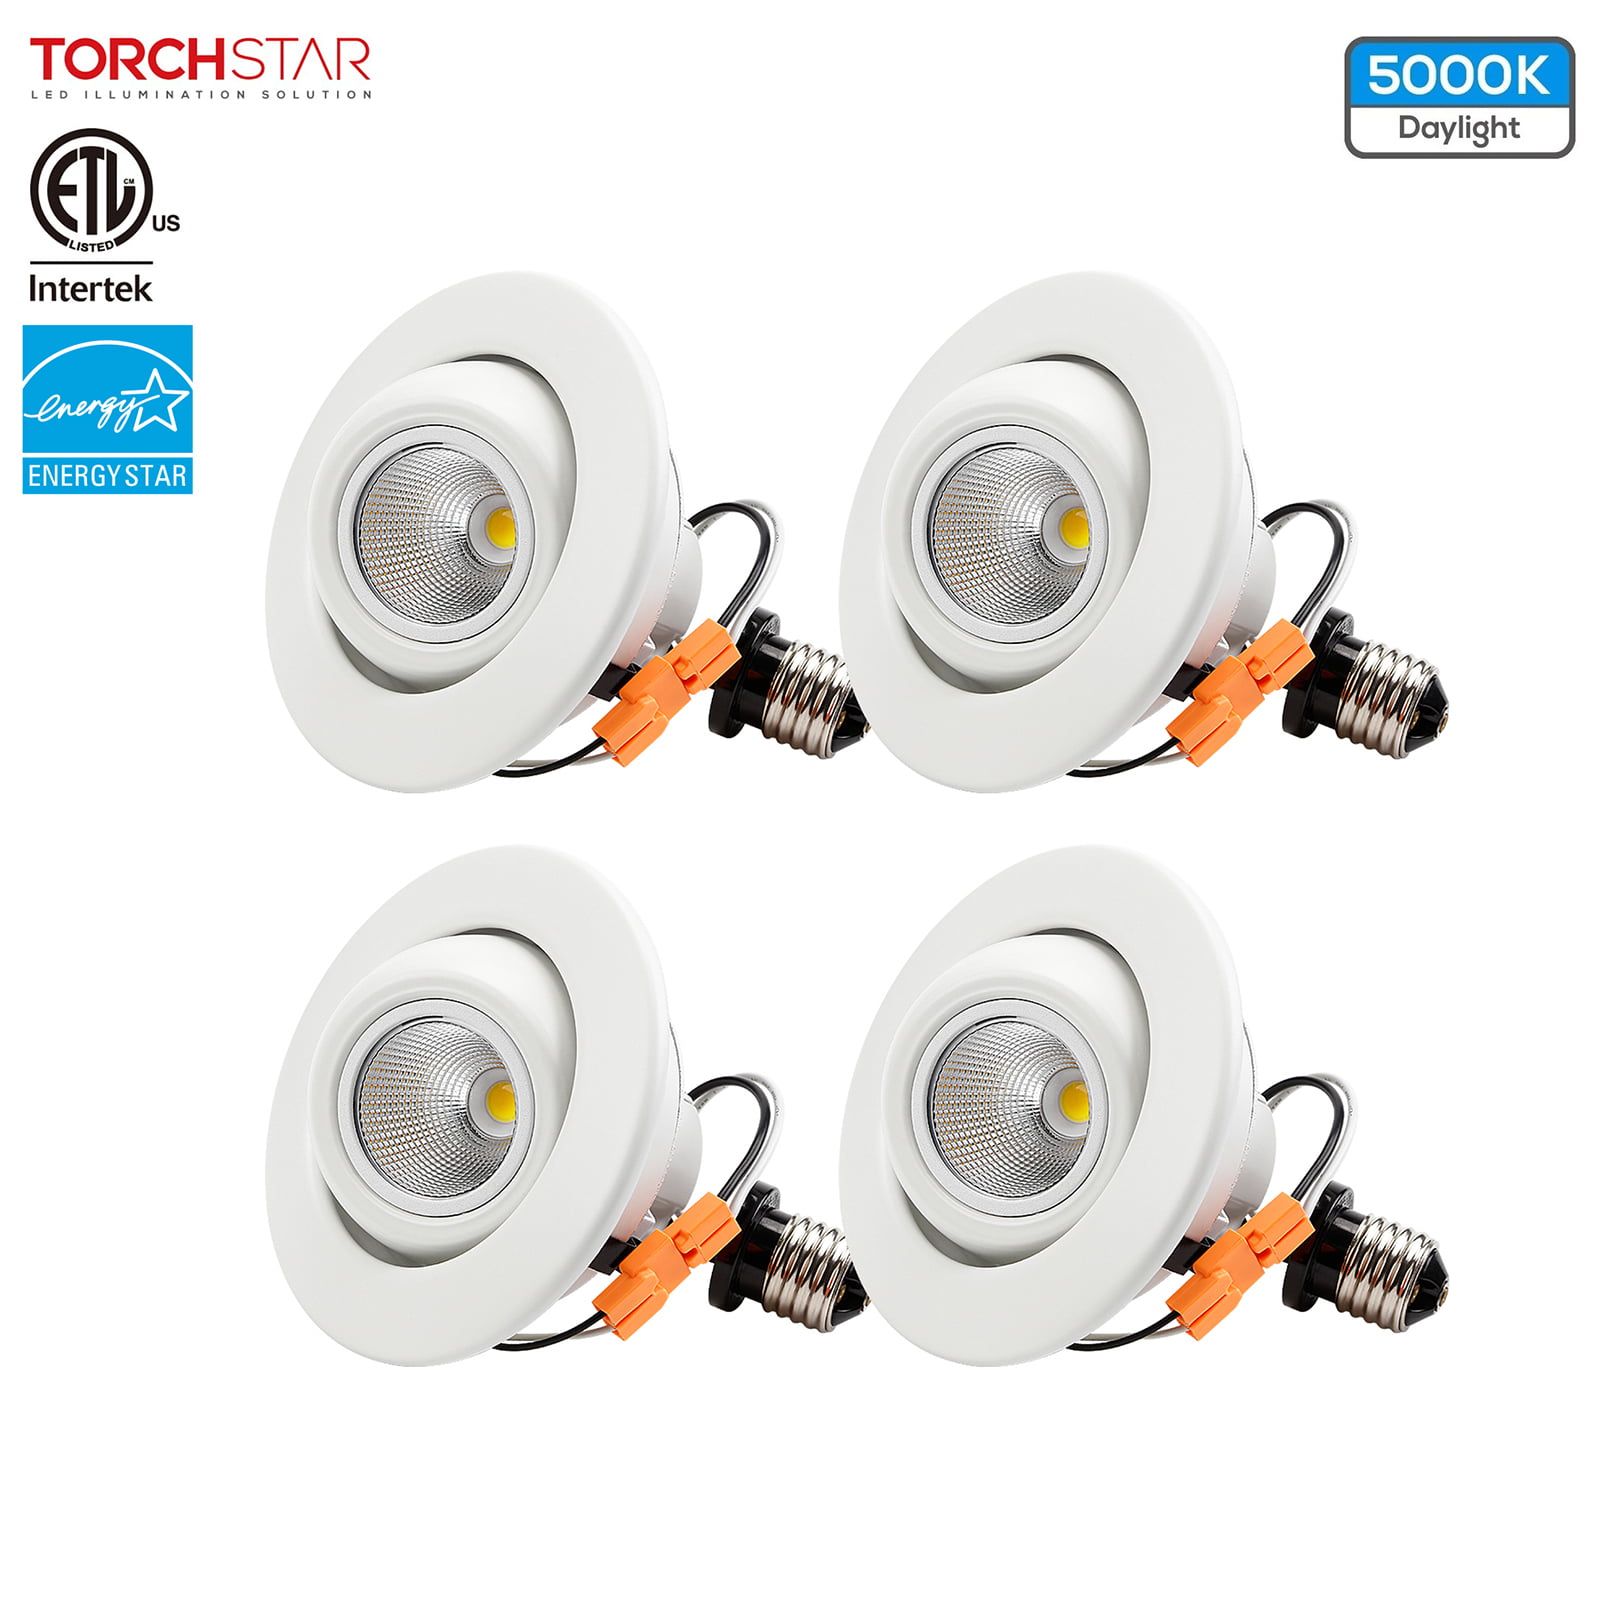 High CRI 90 TORCHSTAR 12 PACK 10W 4 inch Dimmable Recessed LED Downlight 5000K 